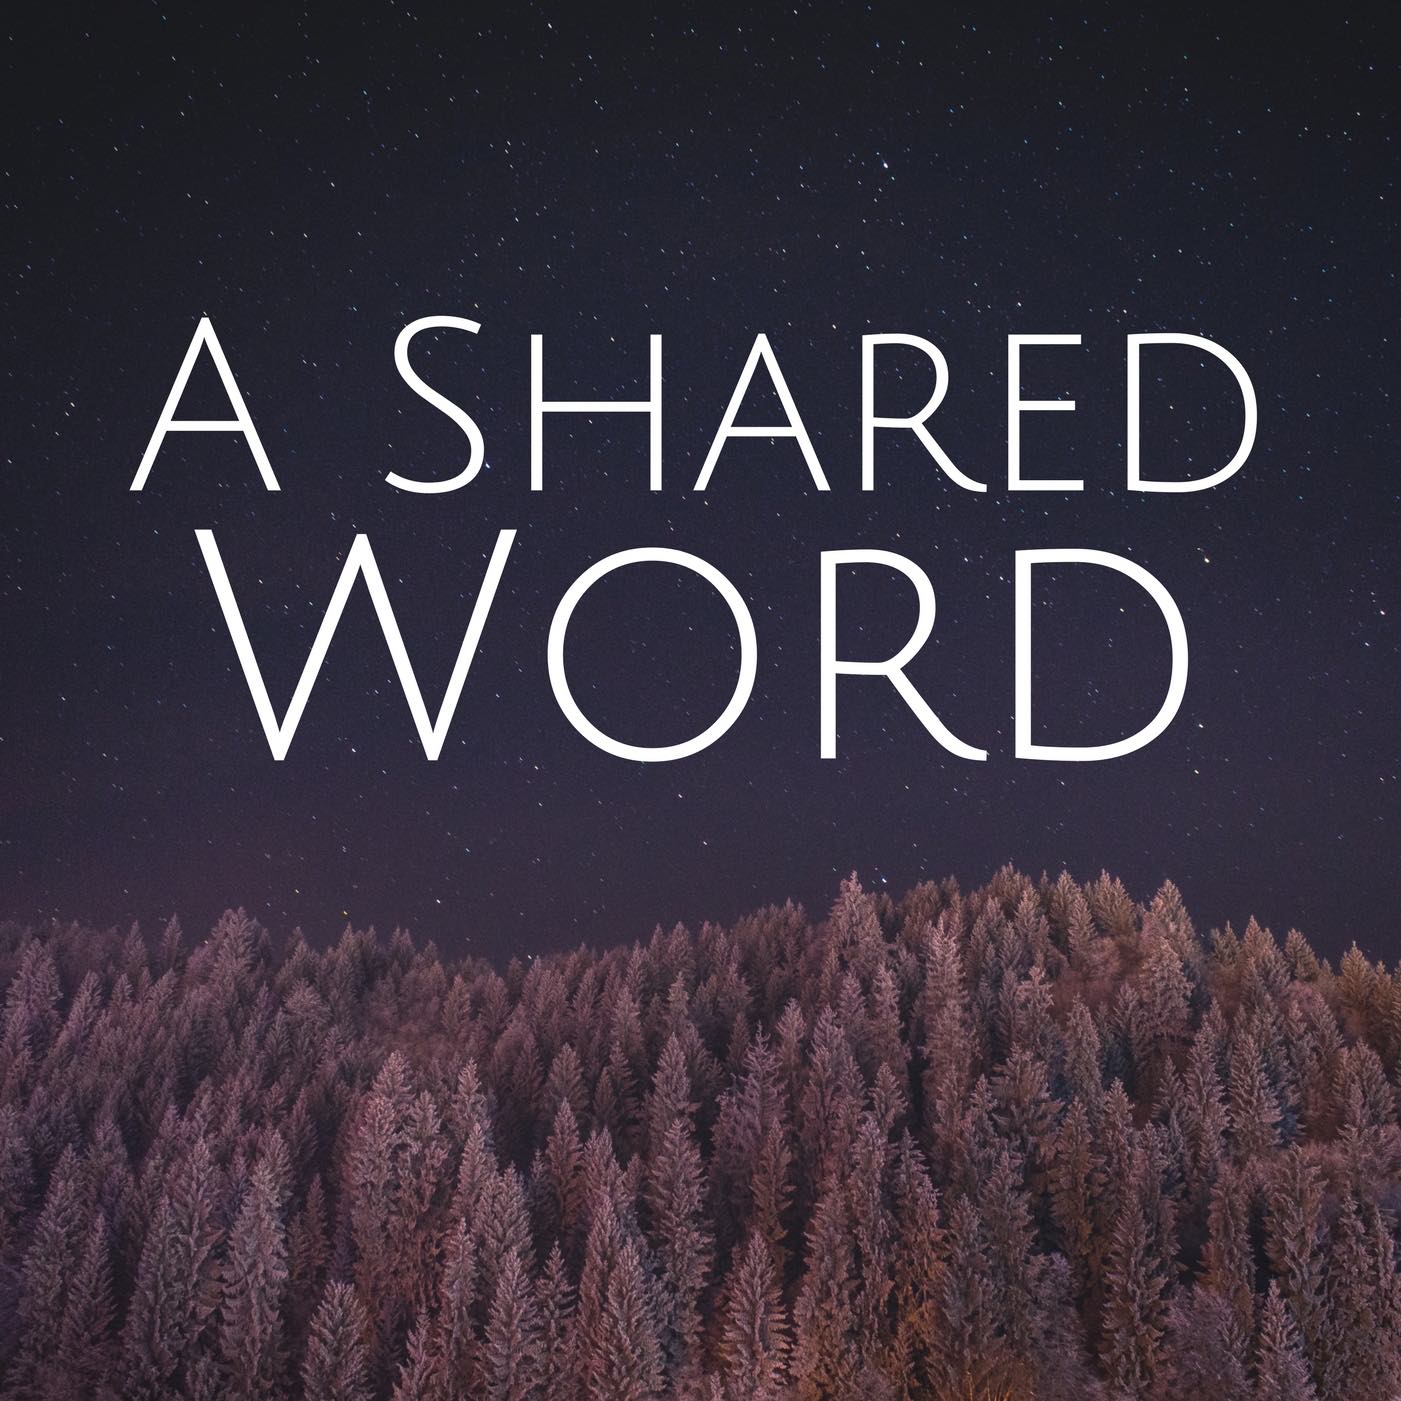 A Shared Word